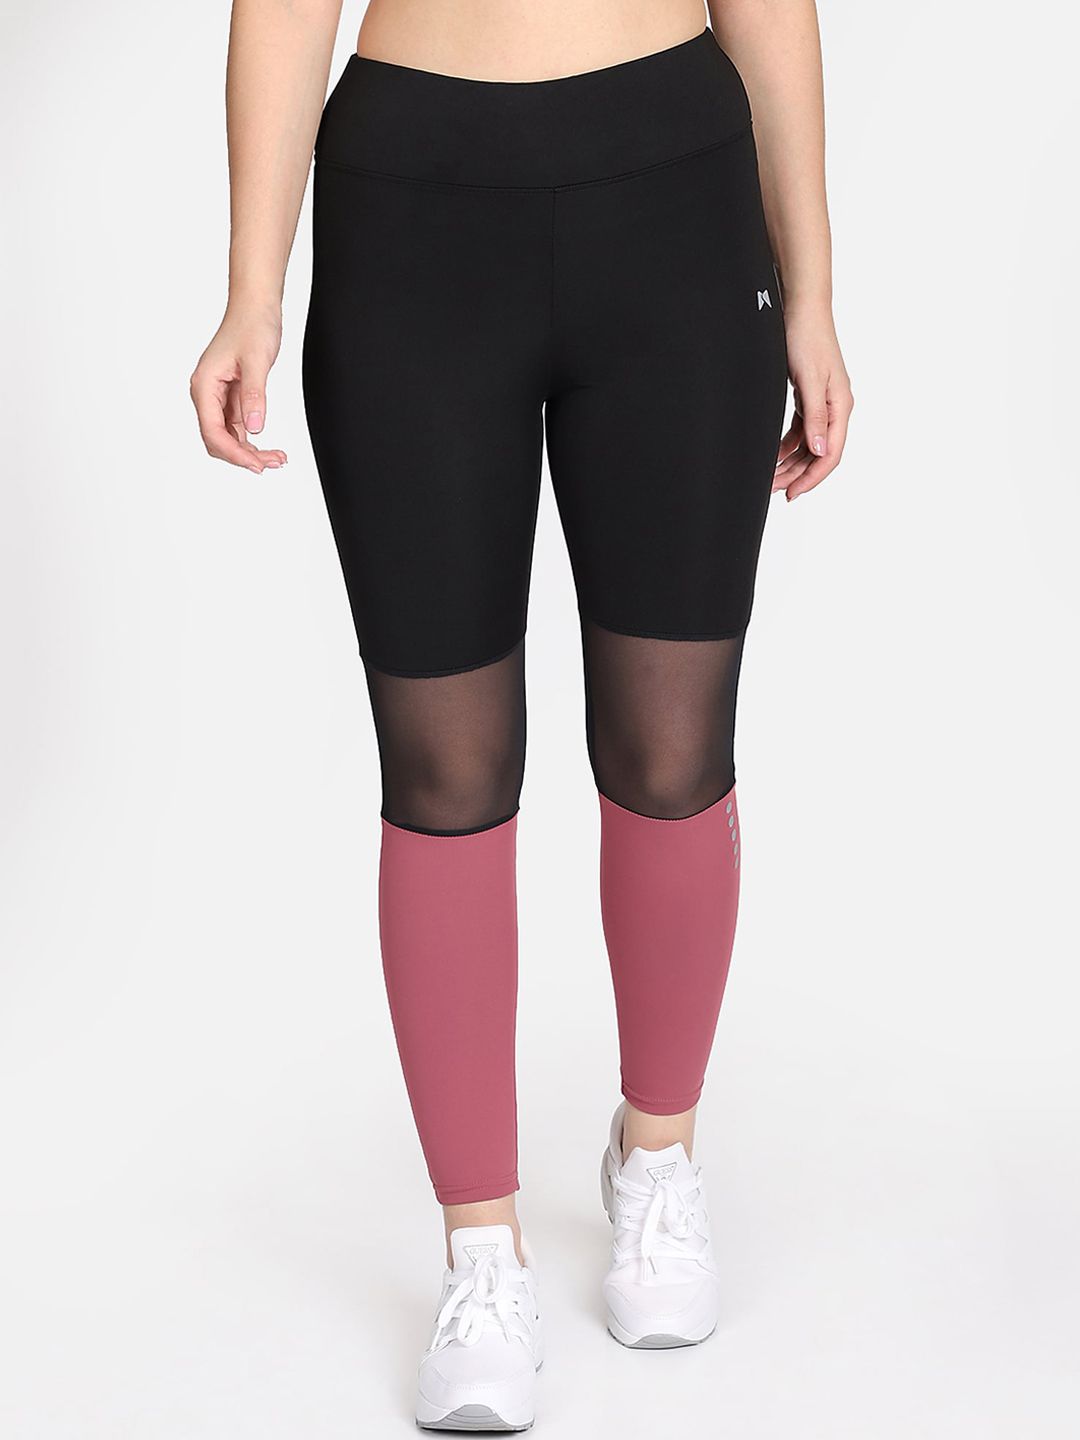 MUSCLE TORQUE Women Black & Pink Colourblocked Gym-Yoga Tights Price in India